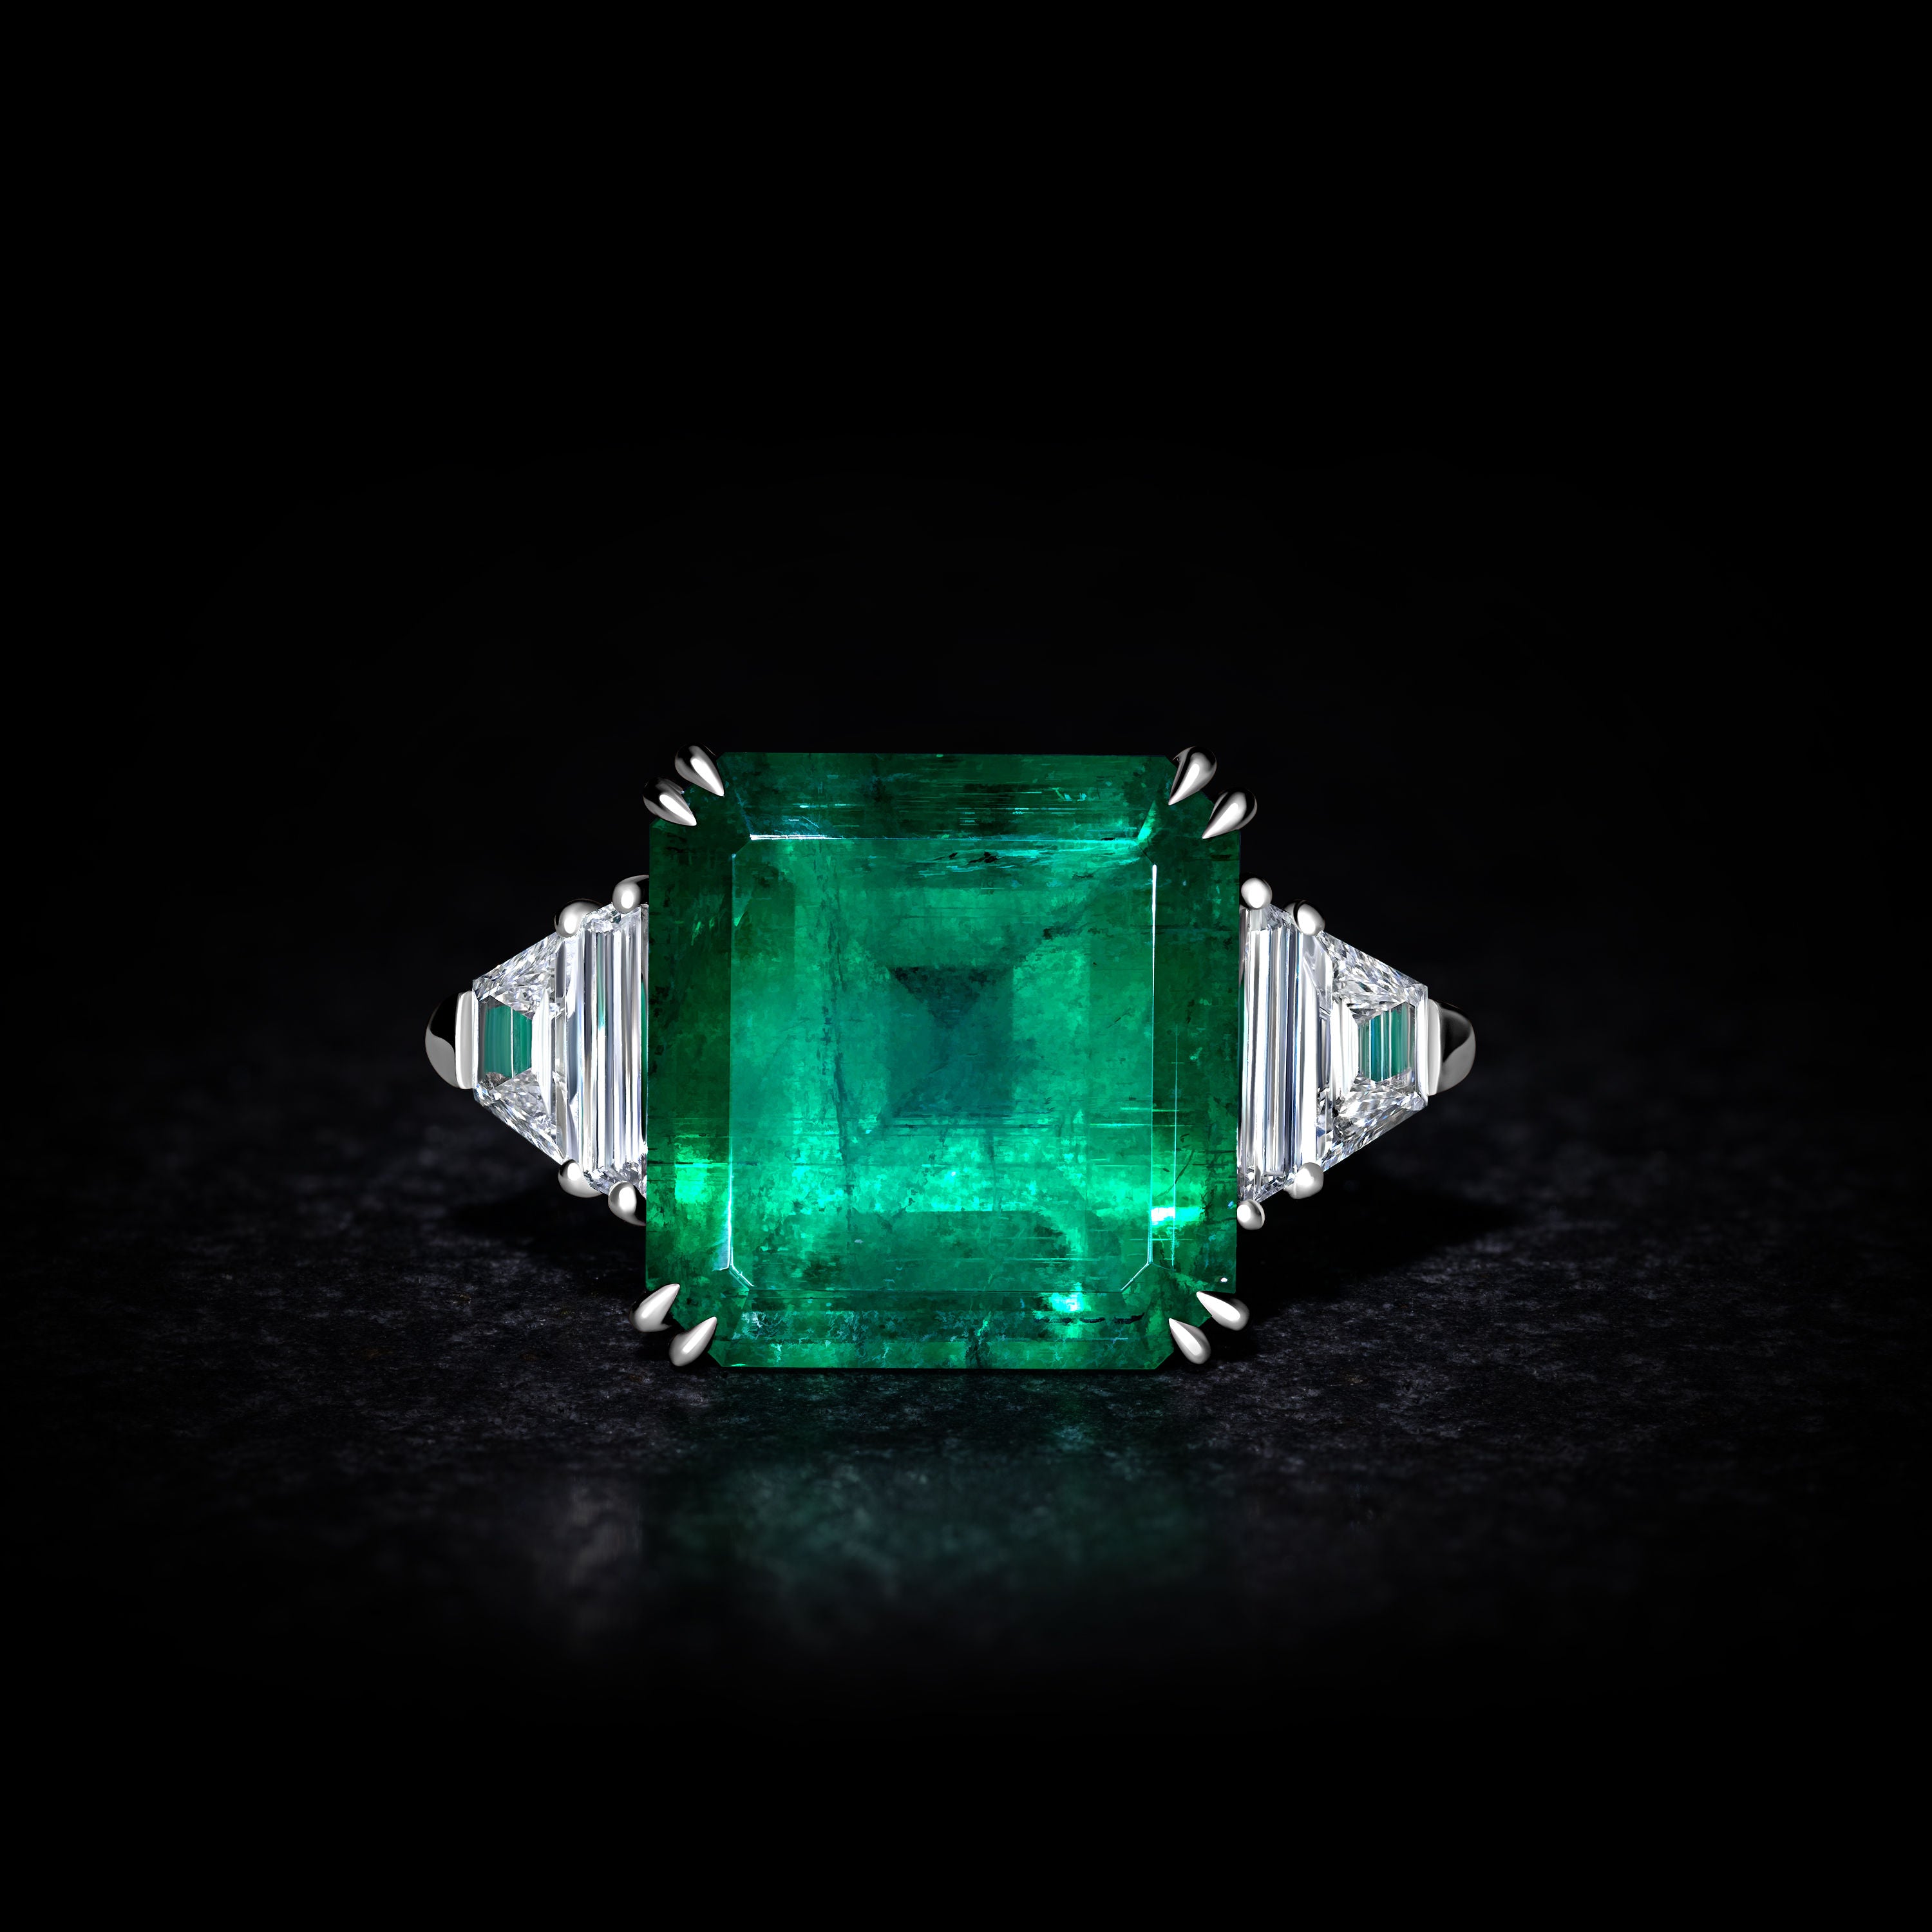 Emerald Ring with Side Stones - 22.75ct TW